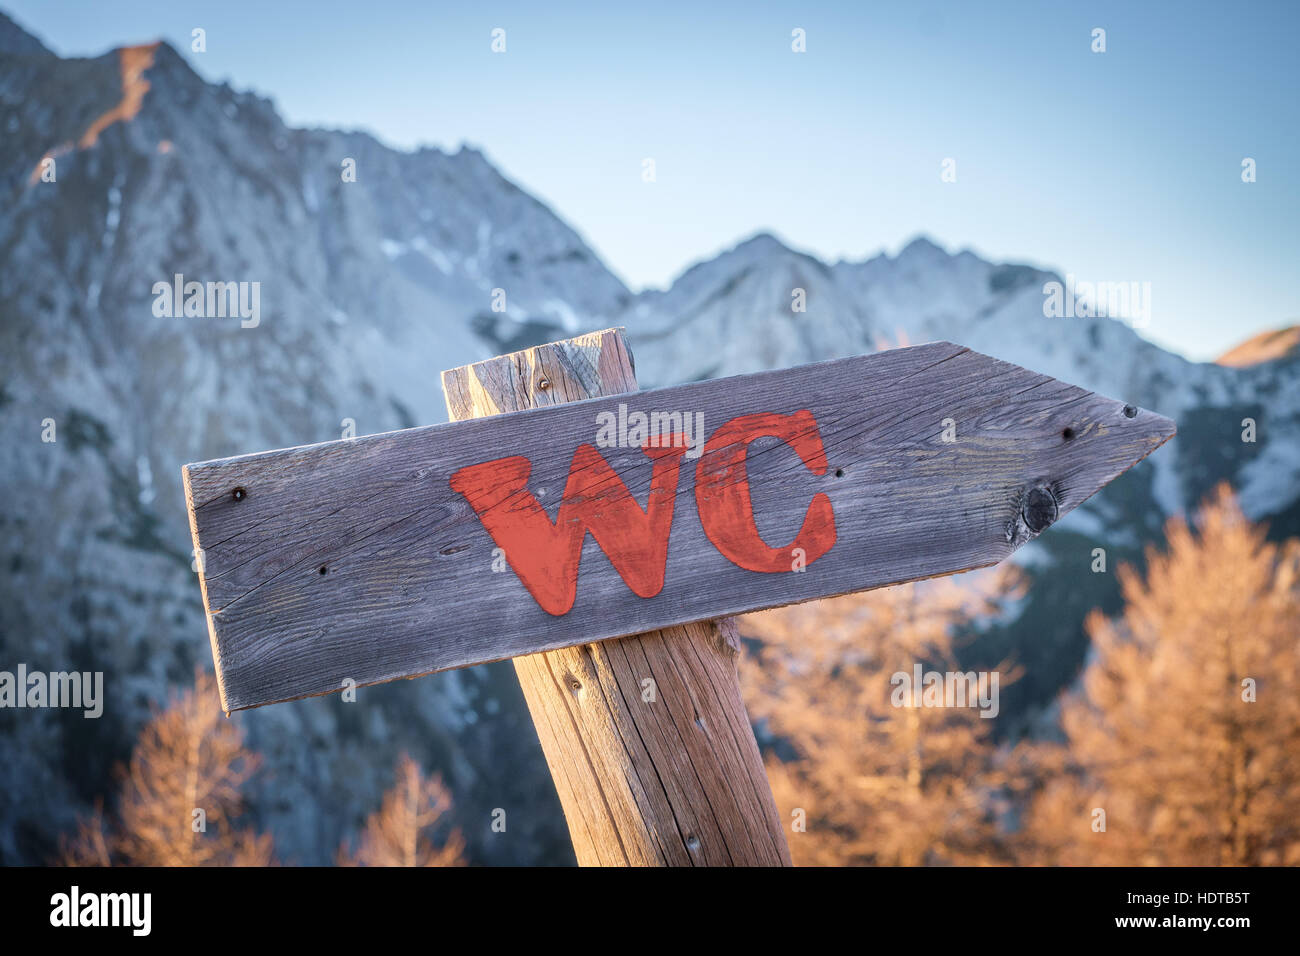 Arrow board pointing towards toilet near a mountain hut. Mountains in the background. Stock Photo